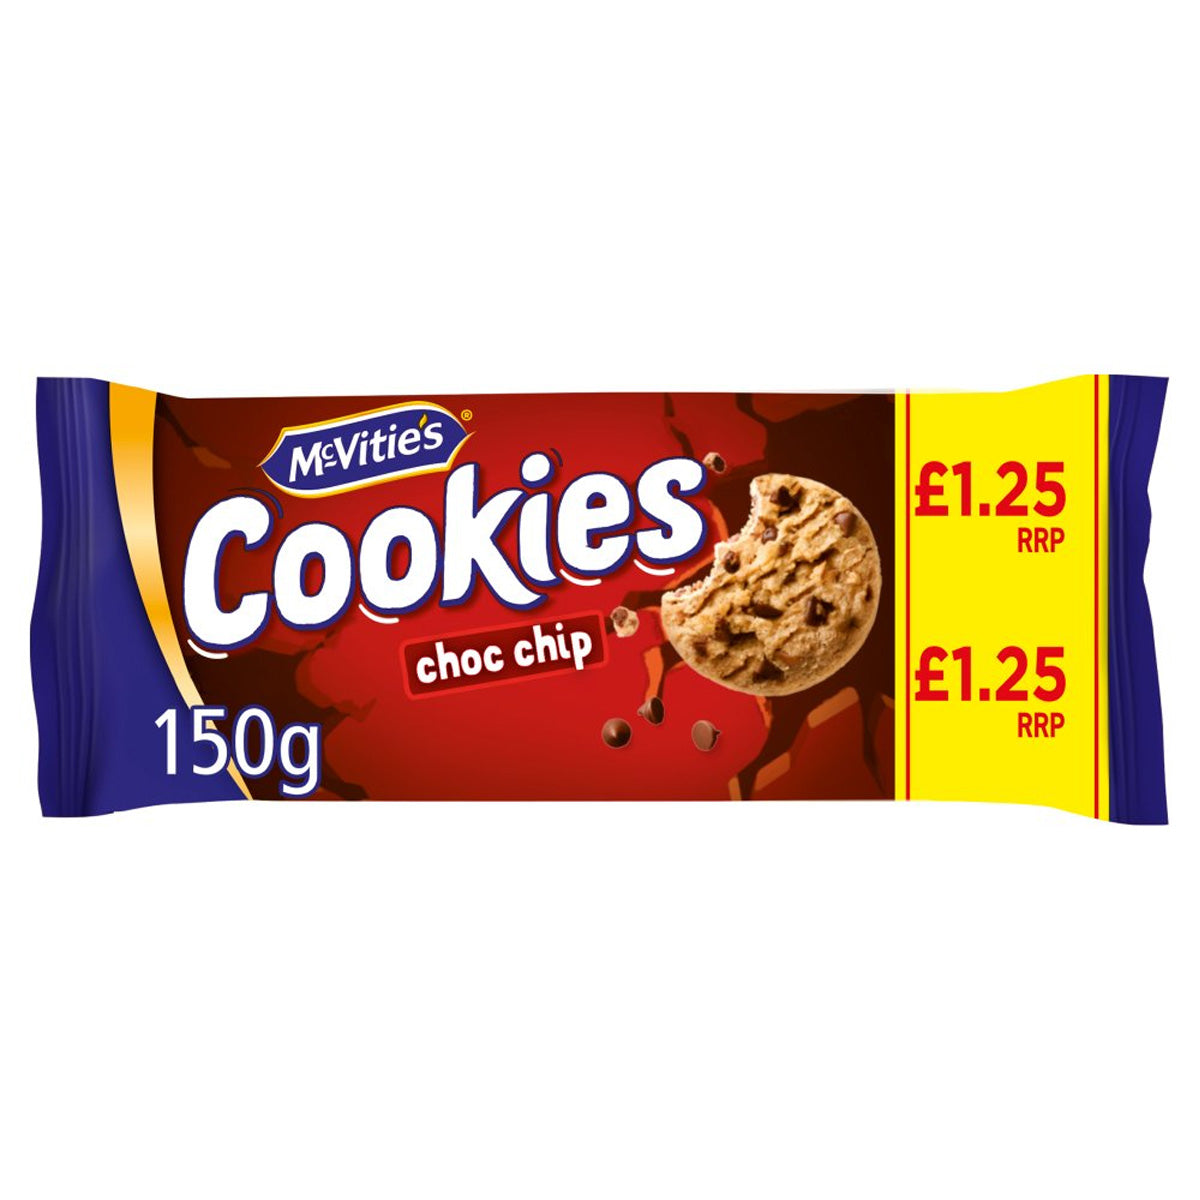 A McVities - Cookies Choc Chip - 150g bar of chocolate chip cookies on a white background.